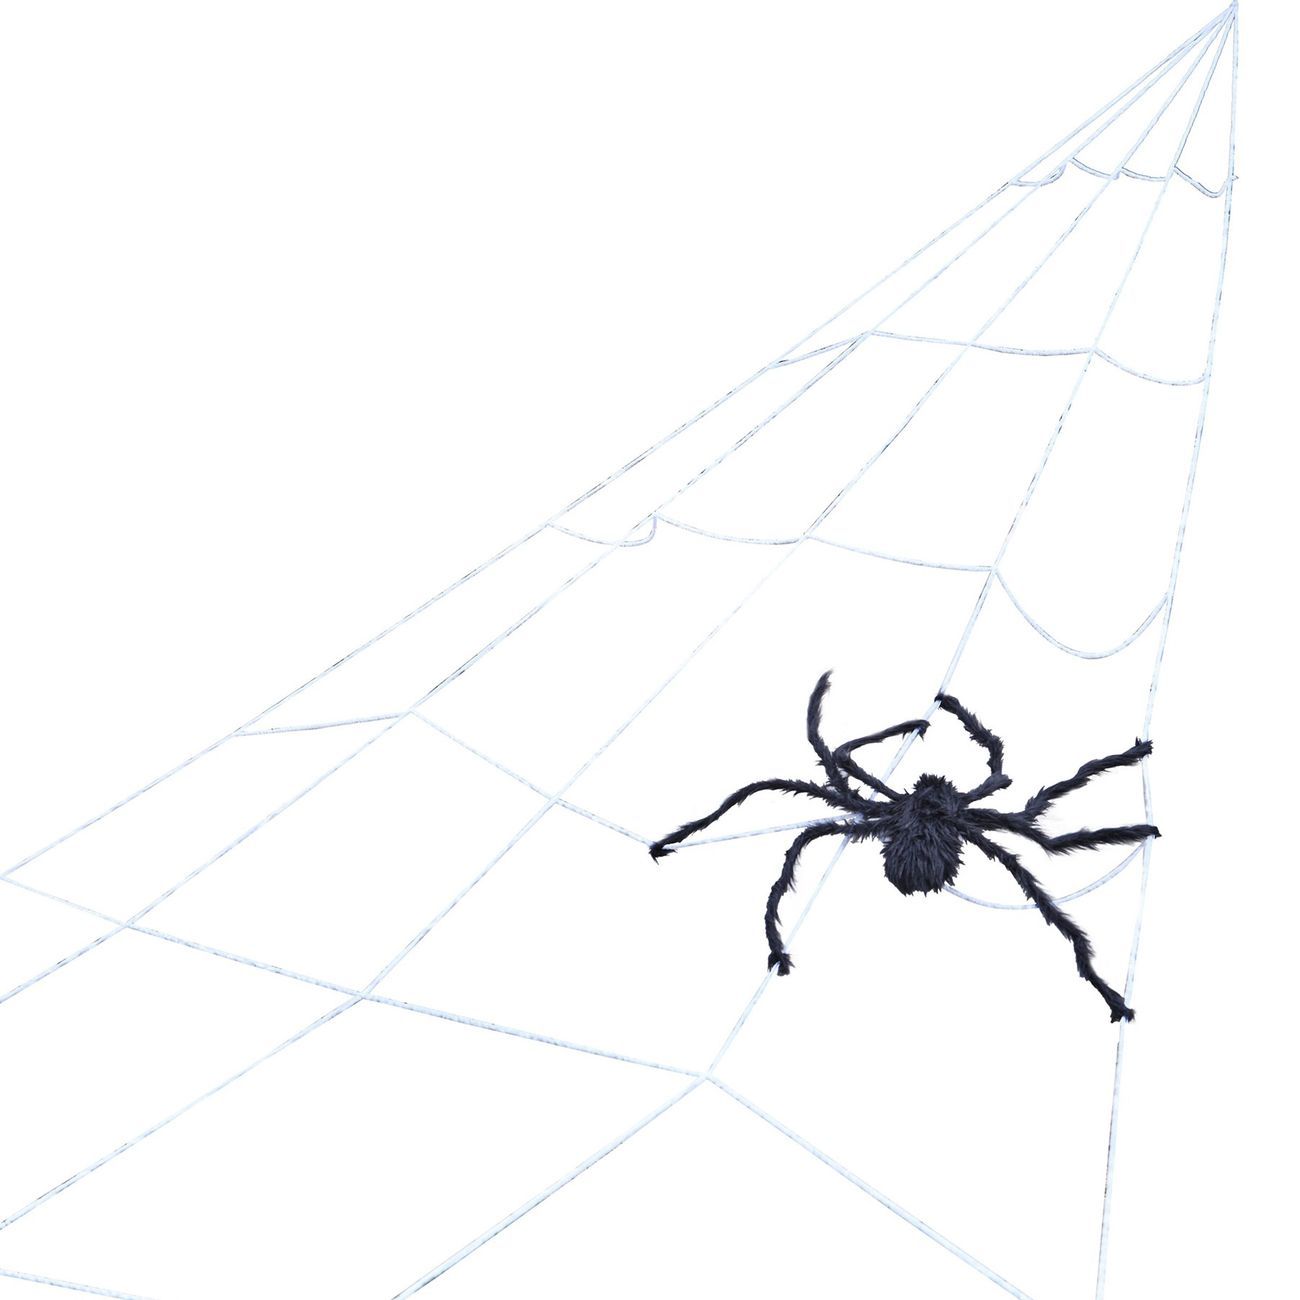 giant-spider-web-91150-1